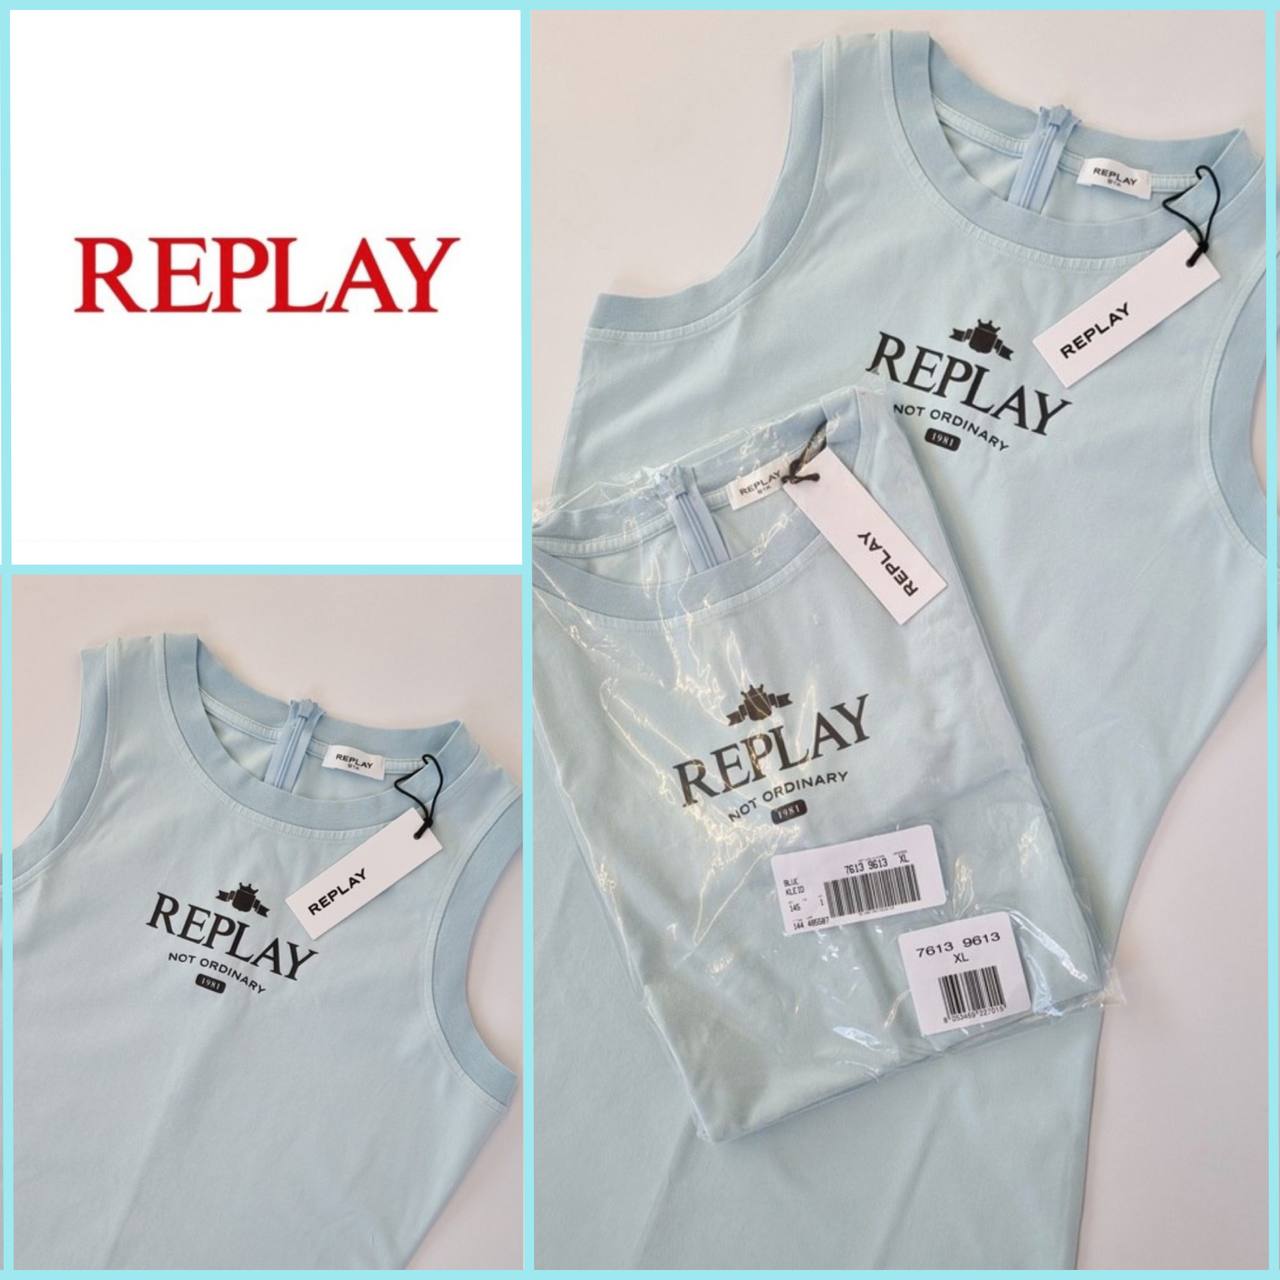 Women's sports dress from Replay